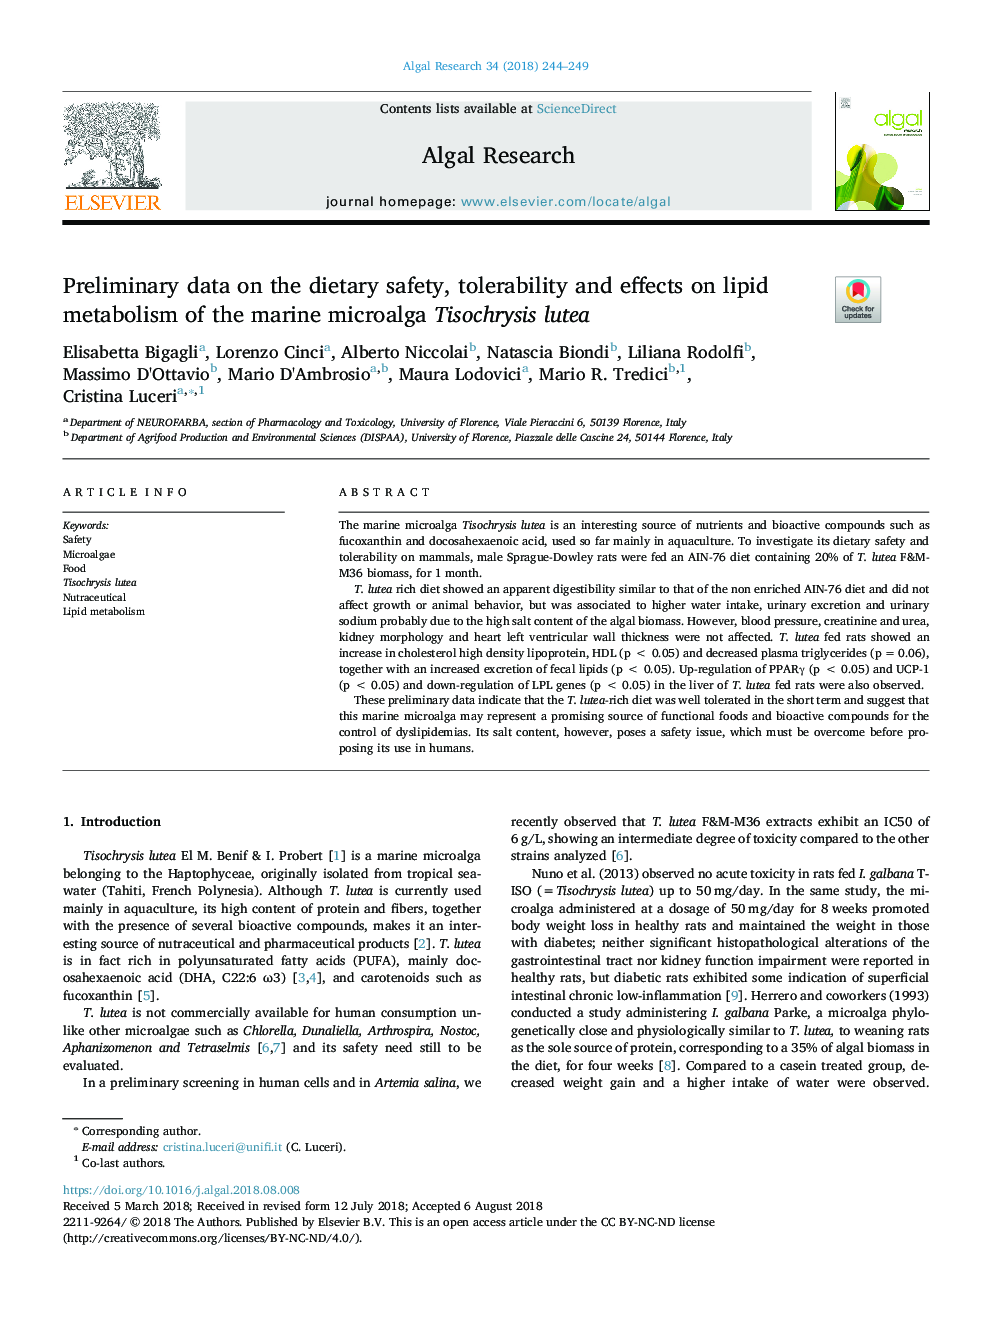 Preliminary data on the dietary safety, tolerability and effects on lipid metabolism of the marine microalga Tisochrysis lutea